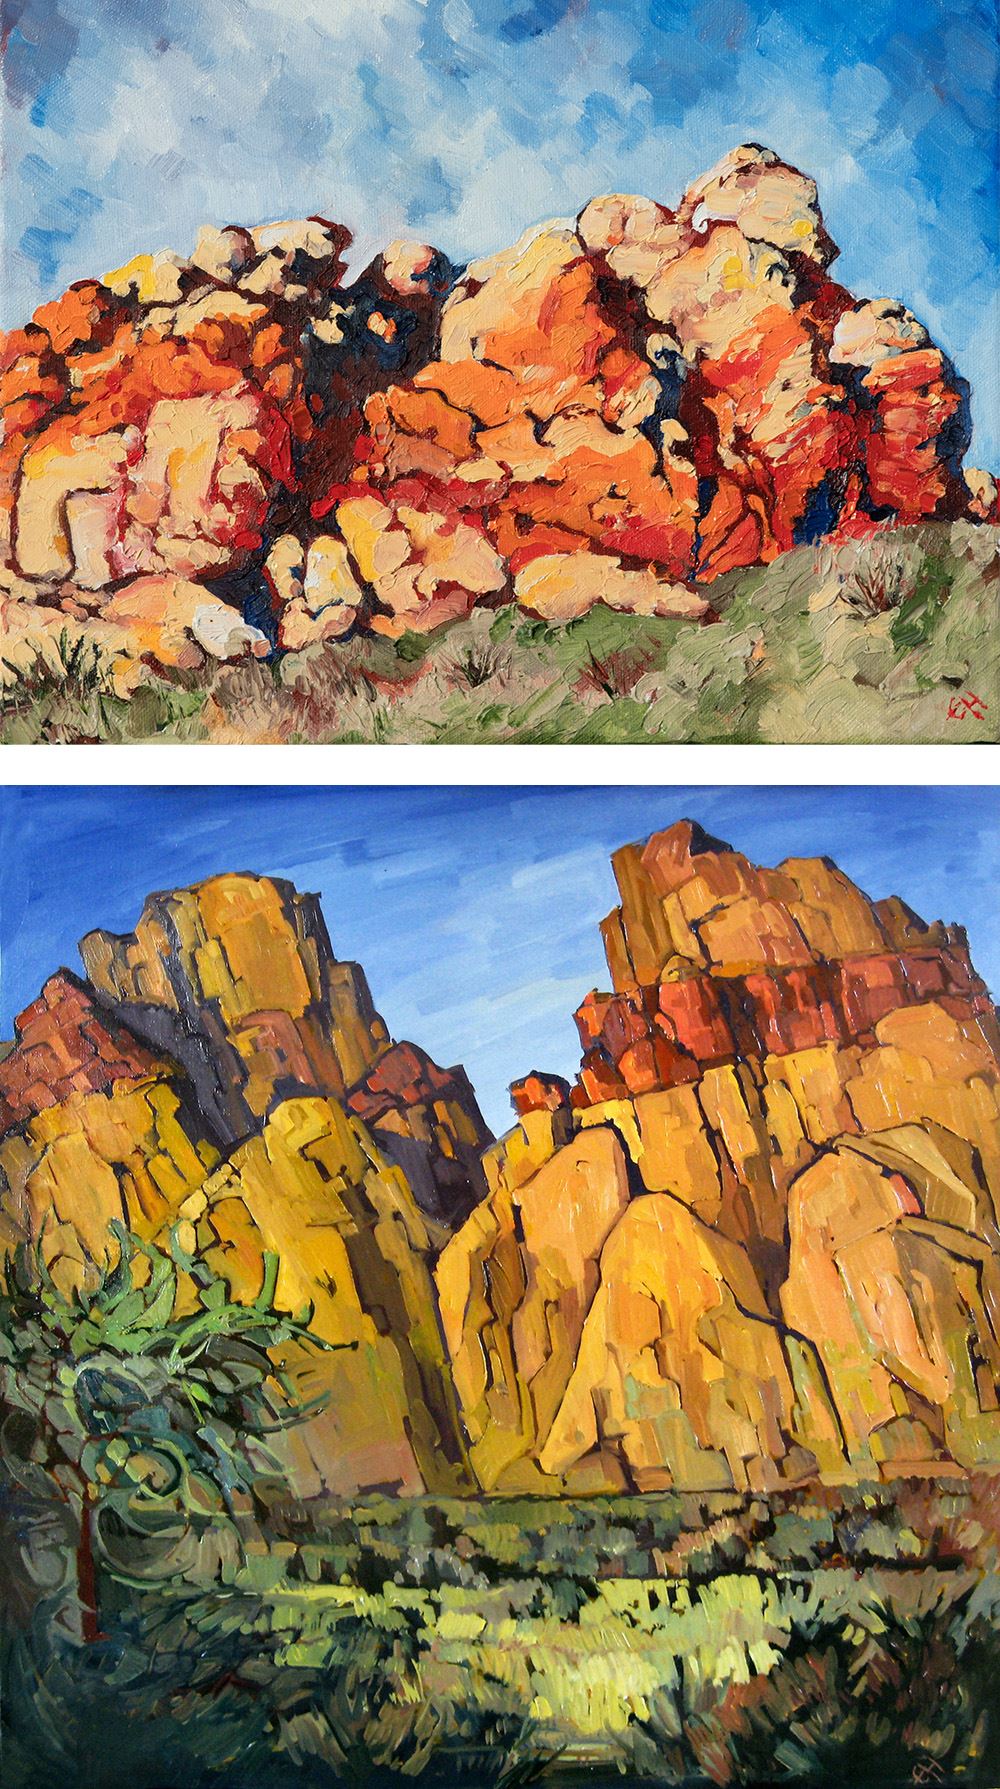 Birth of Open Impressionism In 2006, Erin Hanson created the first painting that gave birth to her signature style, which later became known as &ldquo;Open Impressionism.&rdquo; Erin had just moved to Las Vegas, and she spent her first few days in Vegas camping out at Red Rock Canyon, since the electricity in her new apartment hadn&rsquo;t been turned on yet. &nbsp;With her entire life&rsquo;s belongings piled up in the back of her pickup truck (including her easel and paints), she decided to do some plein air painting on that first morning waking up in the desert. Erin climbed to the top of a dusty gray hillside just as the sun was rising, and she glimpsed Red Rock Canyon for the first time: a glorious expanse of red and orange rock formations glowing in the early morning light. &nbsp; Erin painted a small plein air painting right then and there, and the style of the brush strokes and colors she chose to capture this rocky landscape became the foundation for the entire body of work she would later create. &nbsp;She was so inspired by these rocks that she became a dedicated rock climber and spent many years exploring their craggy depths and painting their vibrant colors onto canvas. Hanson declares, &ldquo;If the electricity had been turned on in my apartment like it was supposed to, I might never have developed Open Impressionism.&rdquo; 